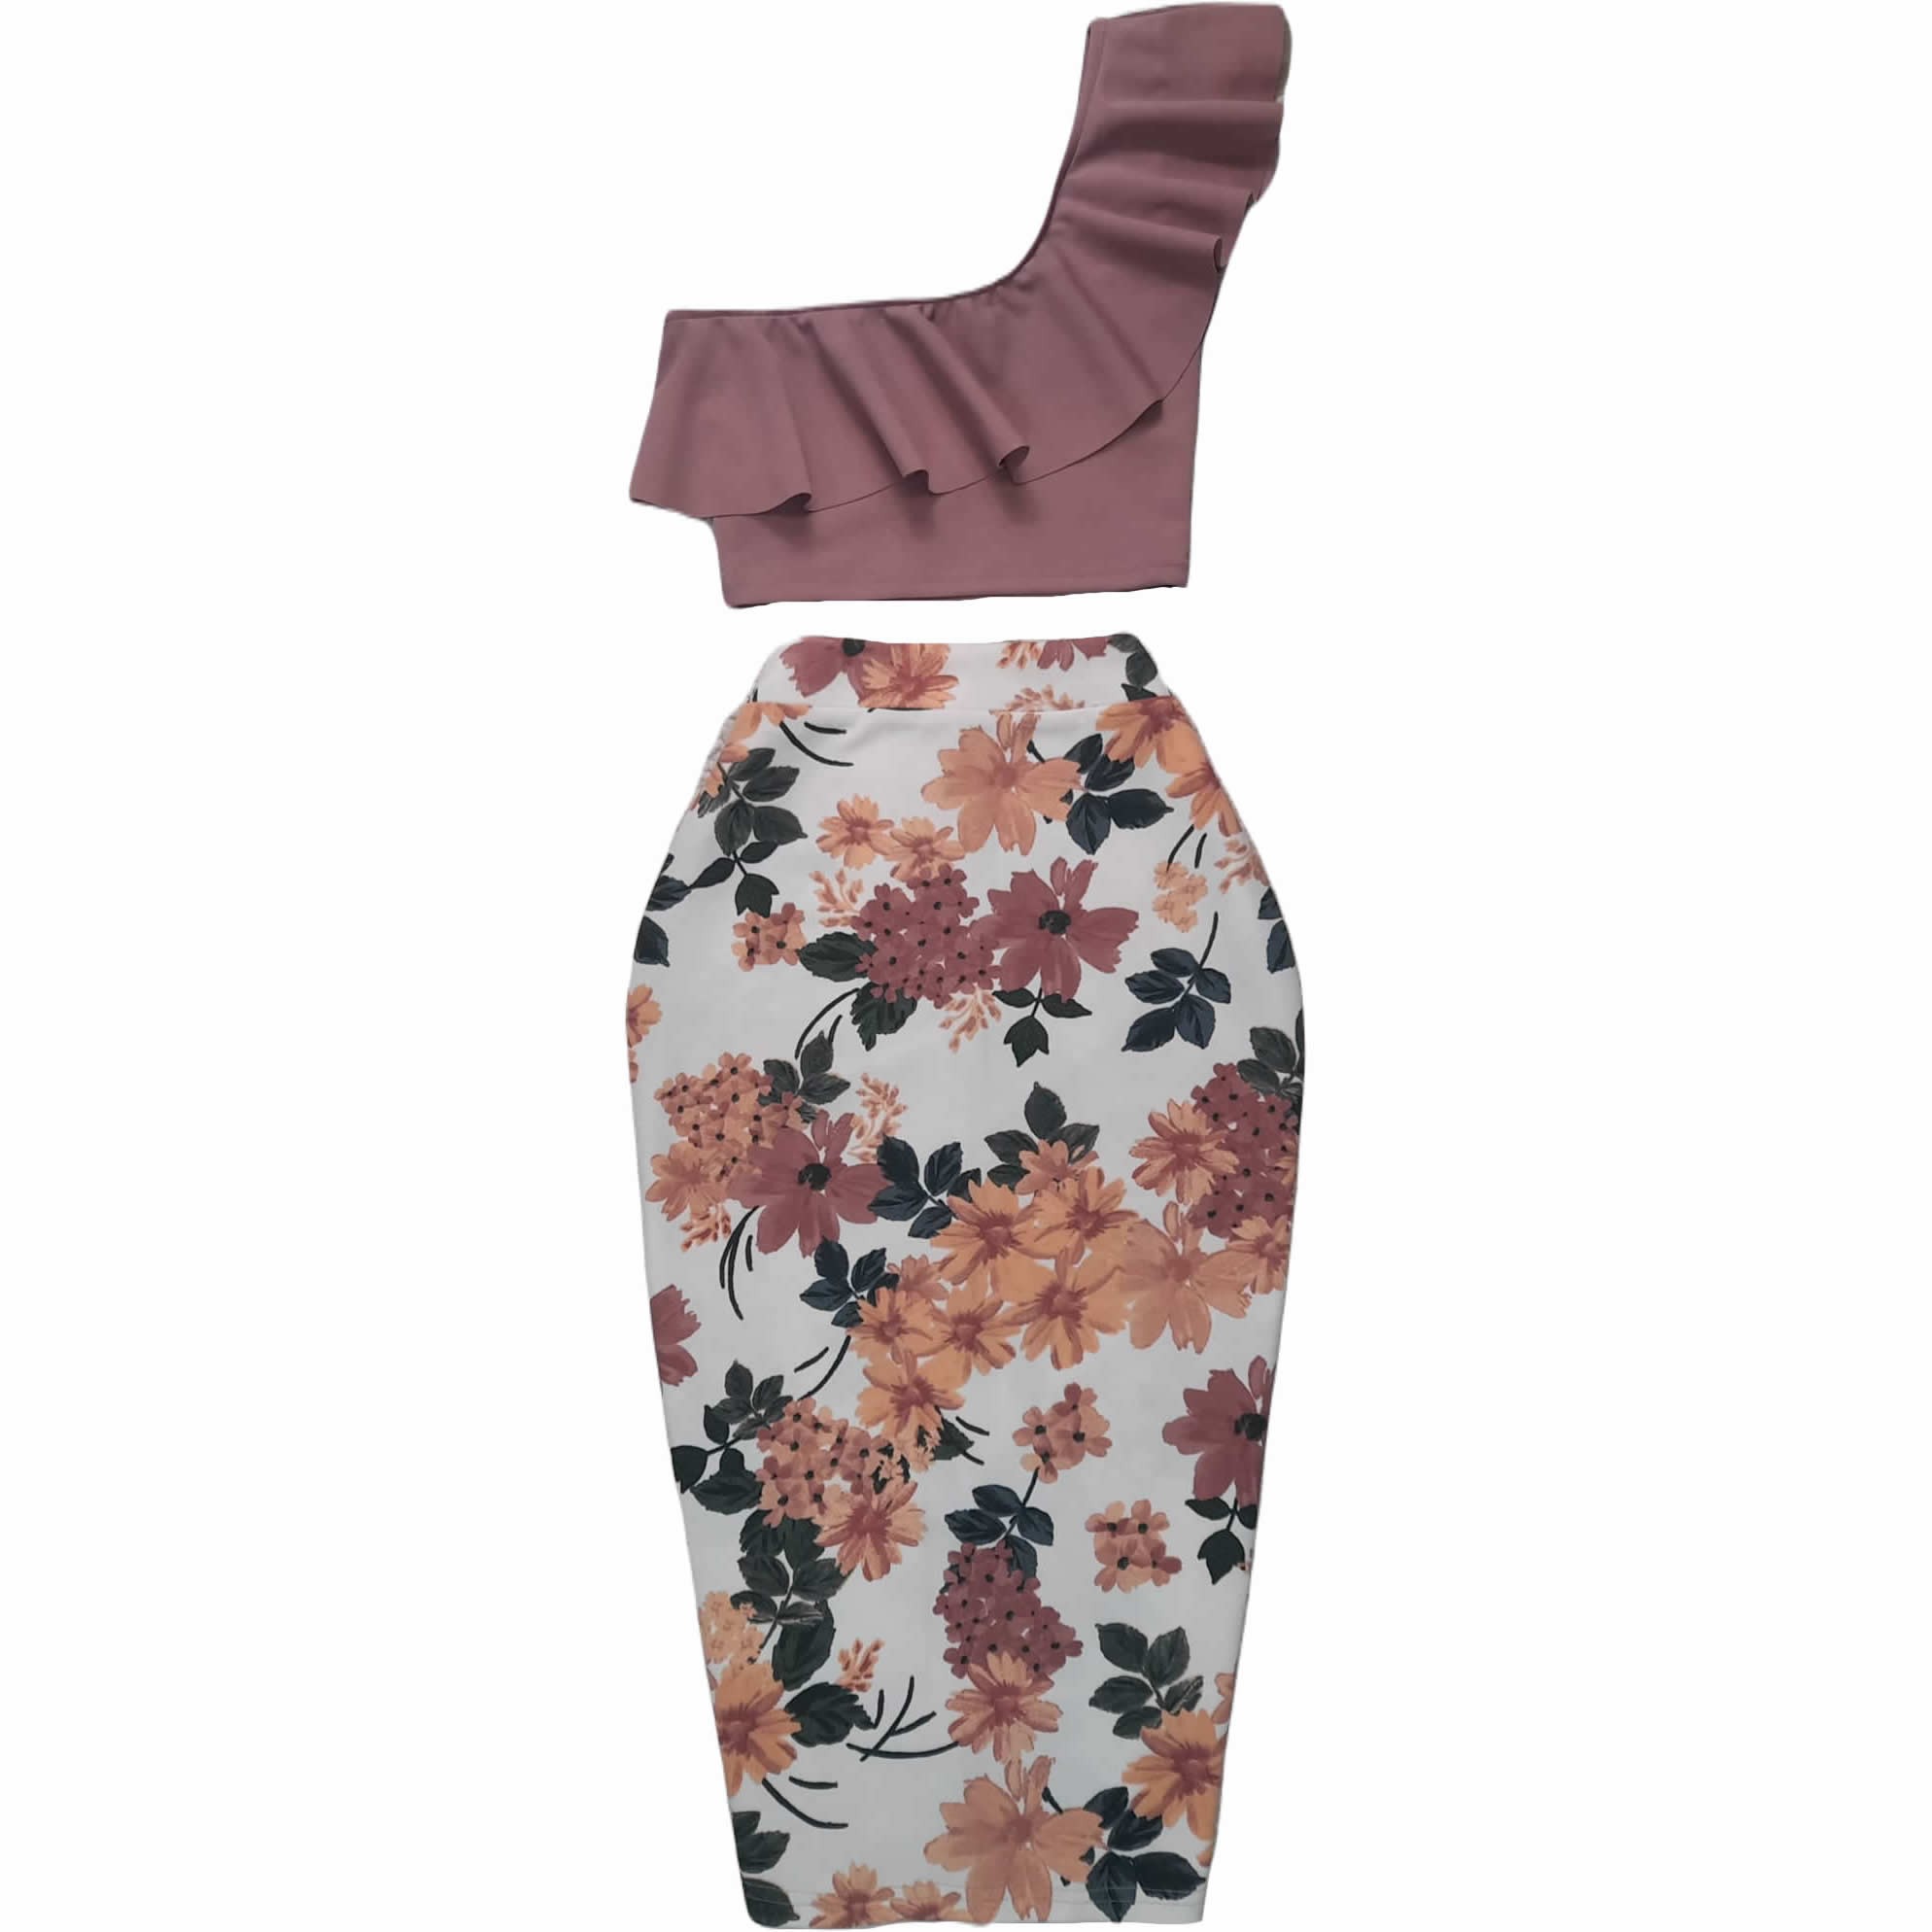 Asymmetric Ruffled Blouse And Floral Pencil Skirt Set